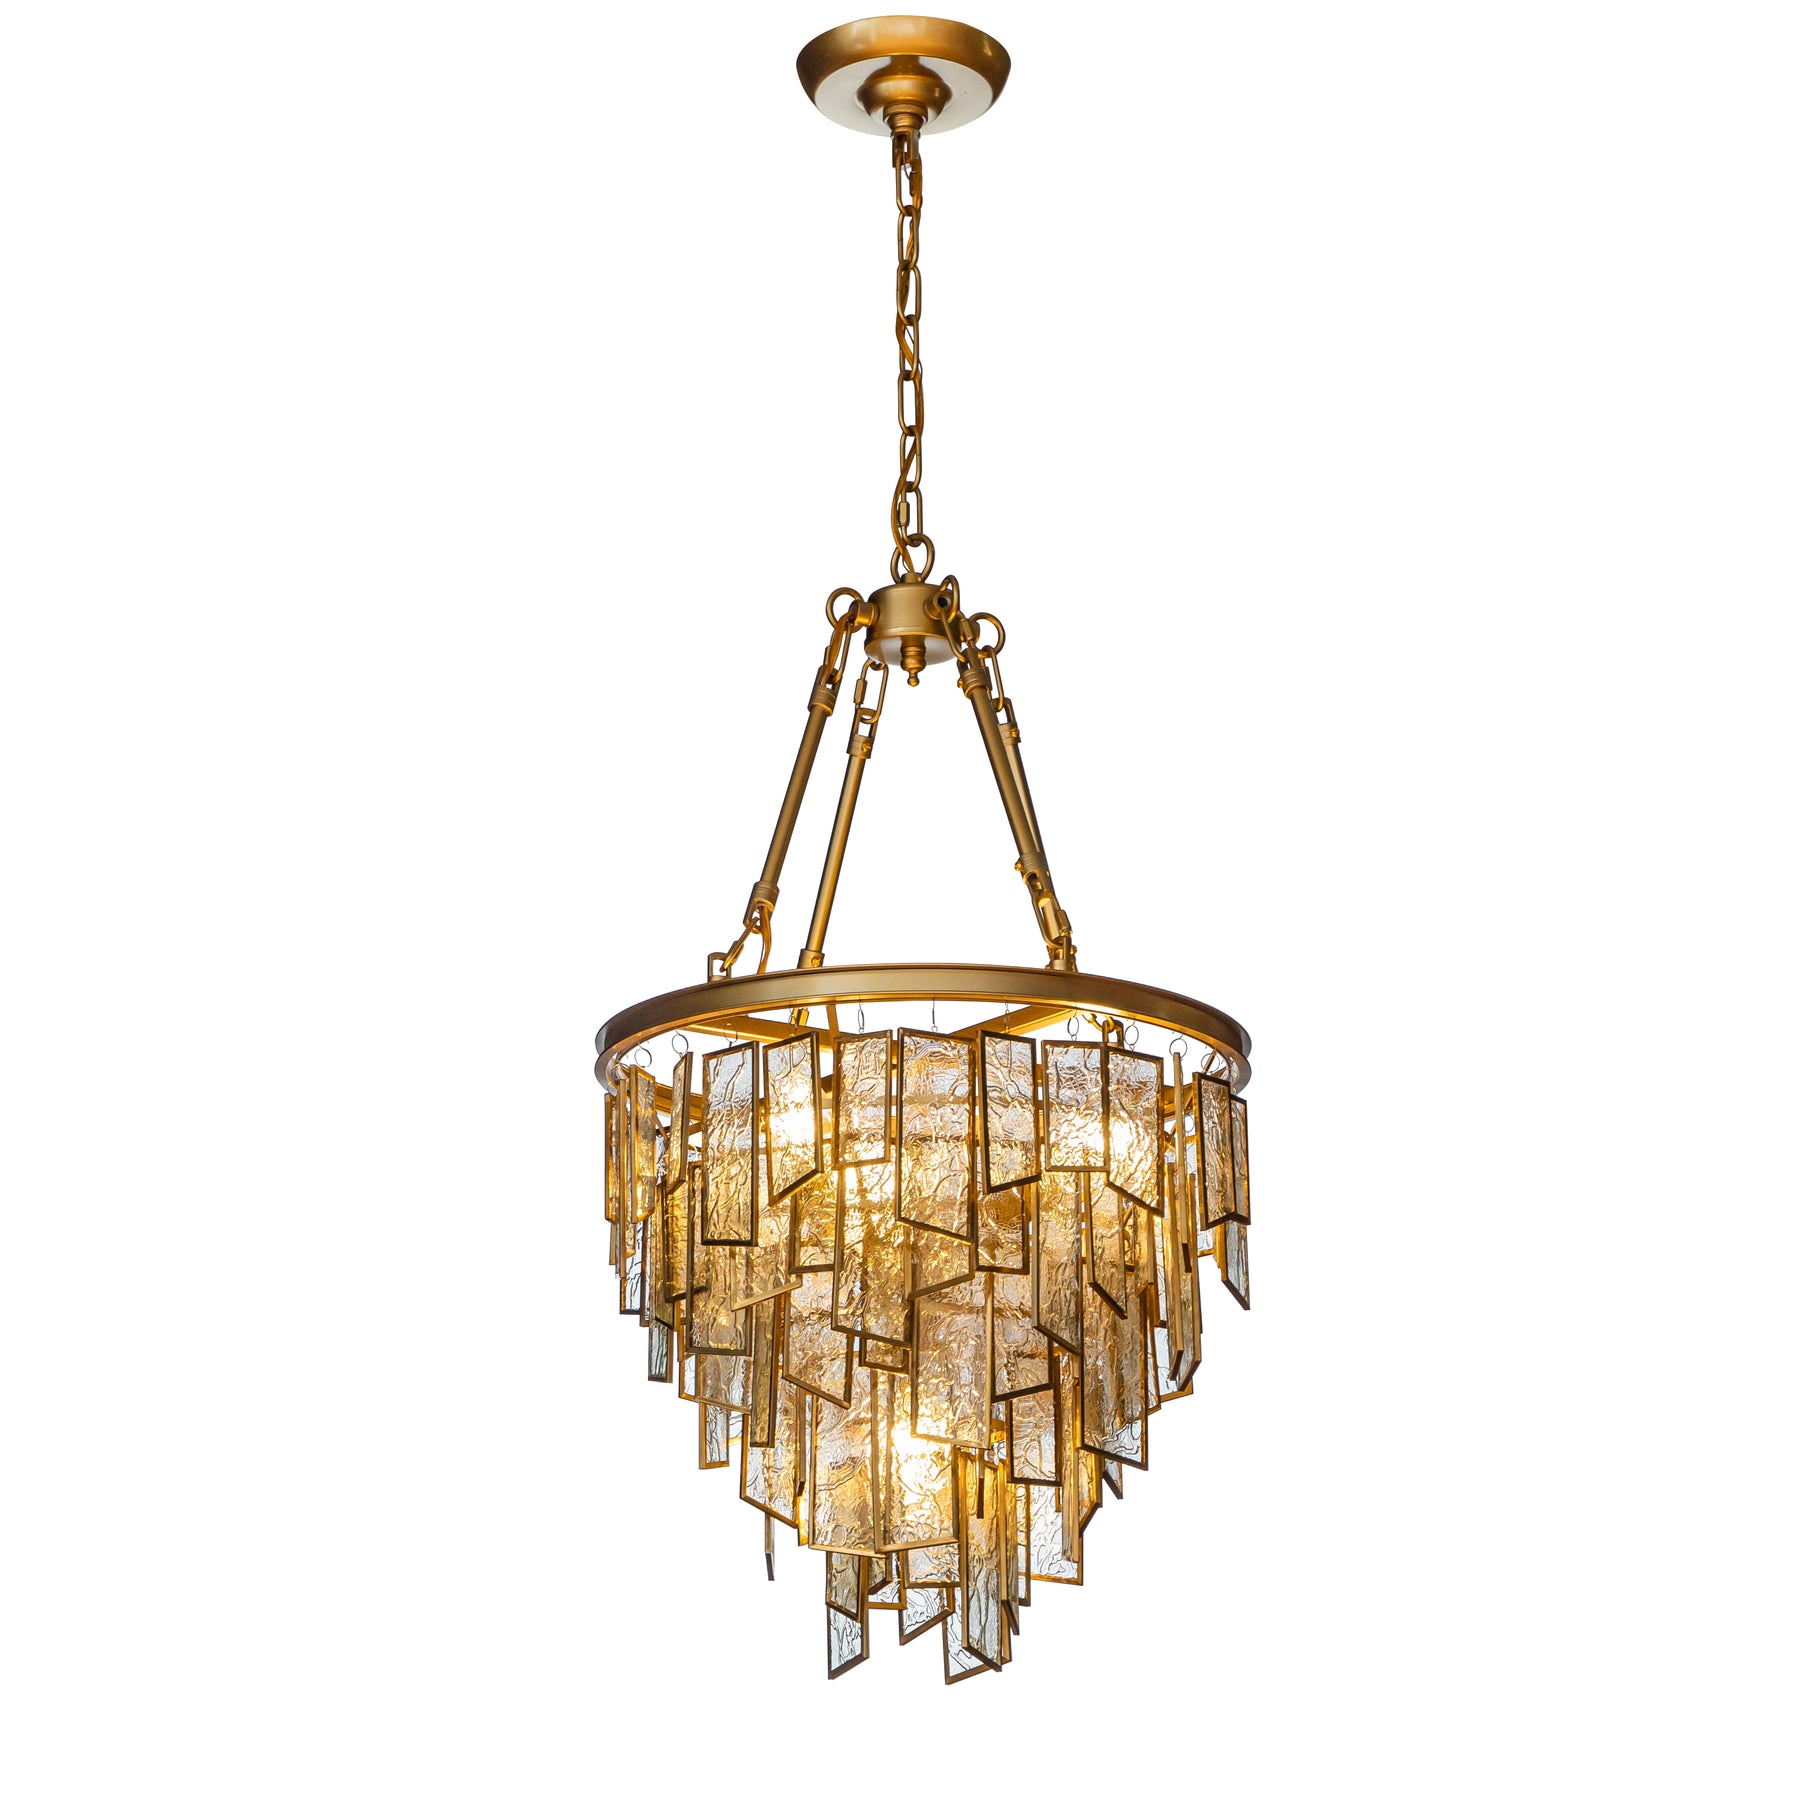 OPEN BOX- 16 in Glamor Painted Brass Tiered Chandelier With Water Glass Shade